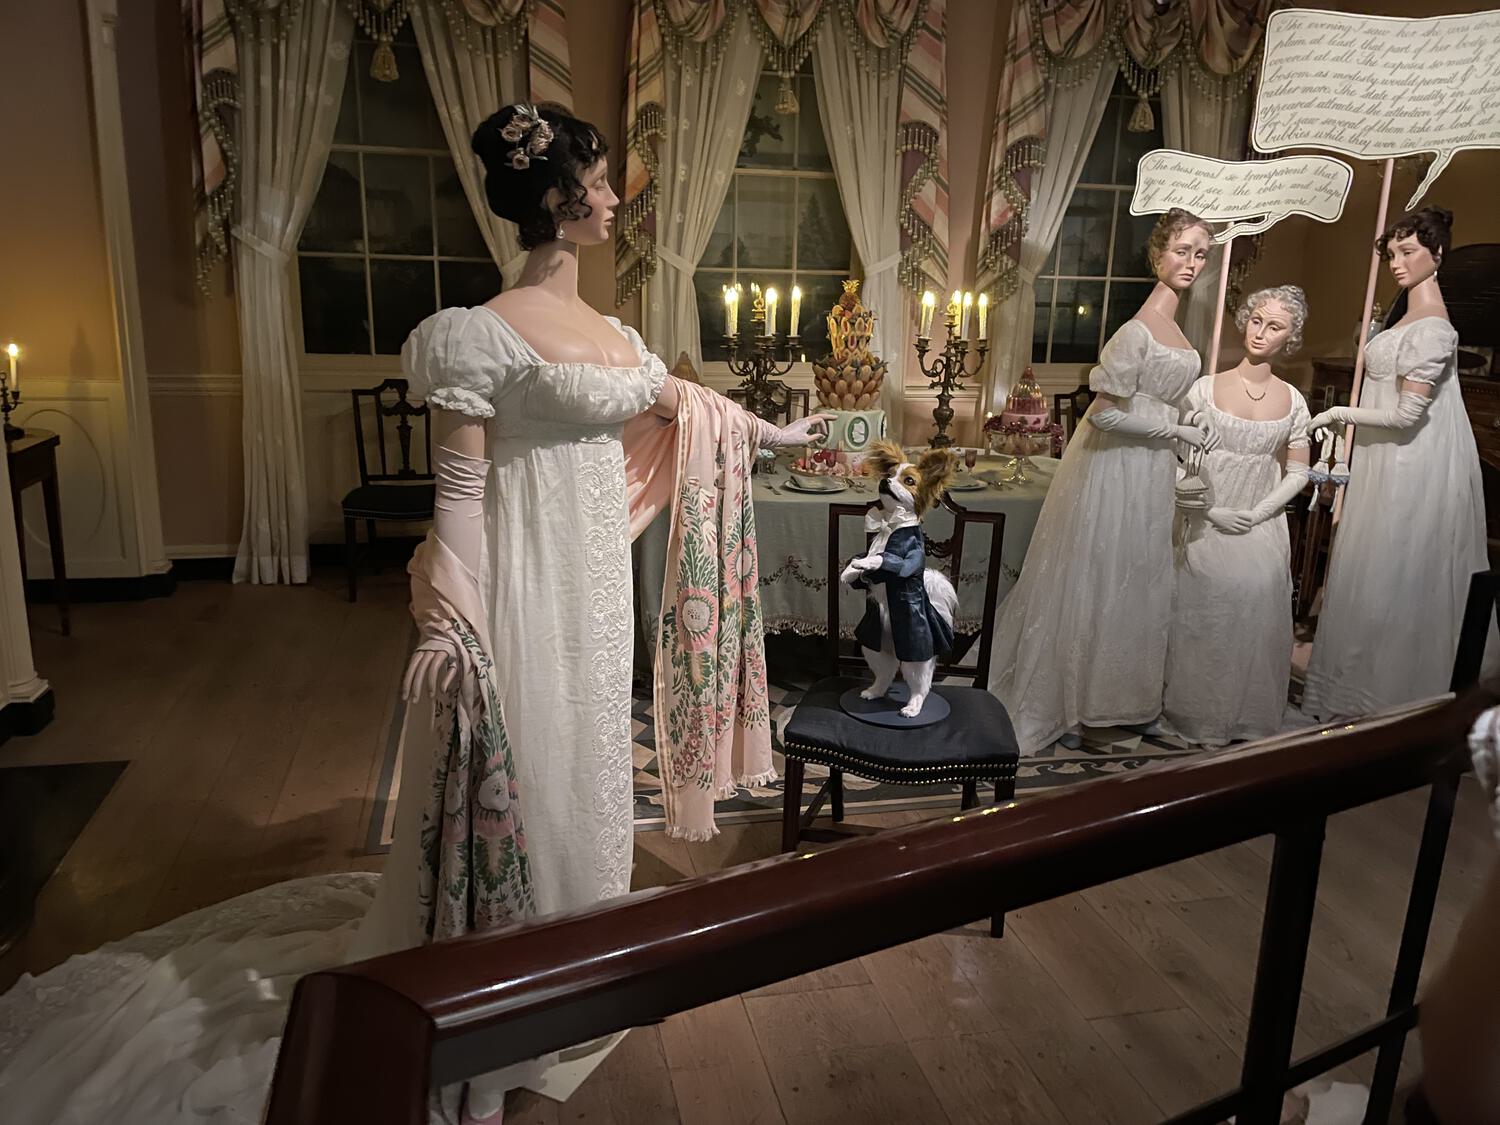 Mannequins in fine 18th Century eveningwear gather in a period room. There are illegible speech bubbles above a group that are watching another from afar. The solo mannequin is playing with a dog, standing upright on a chair, also dressed formally.